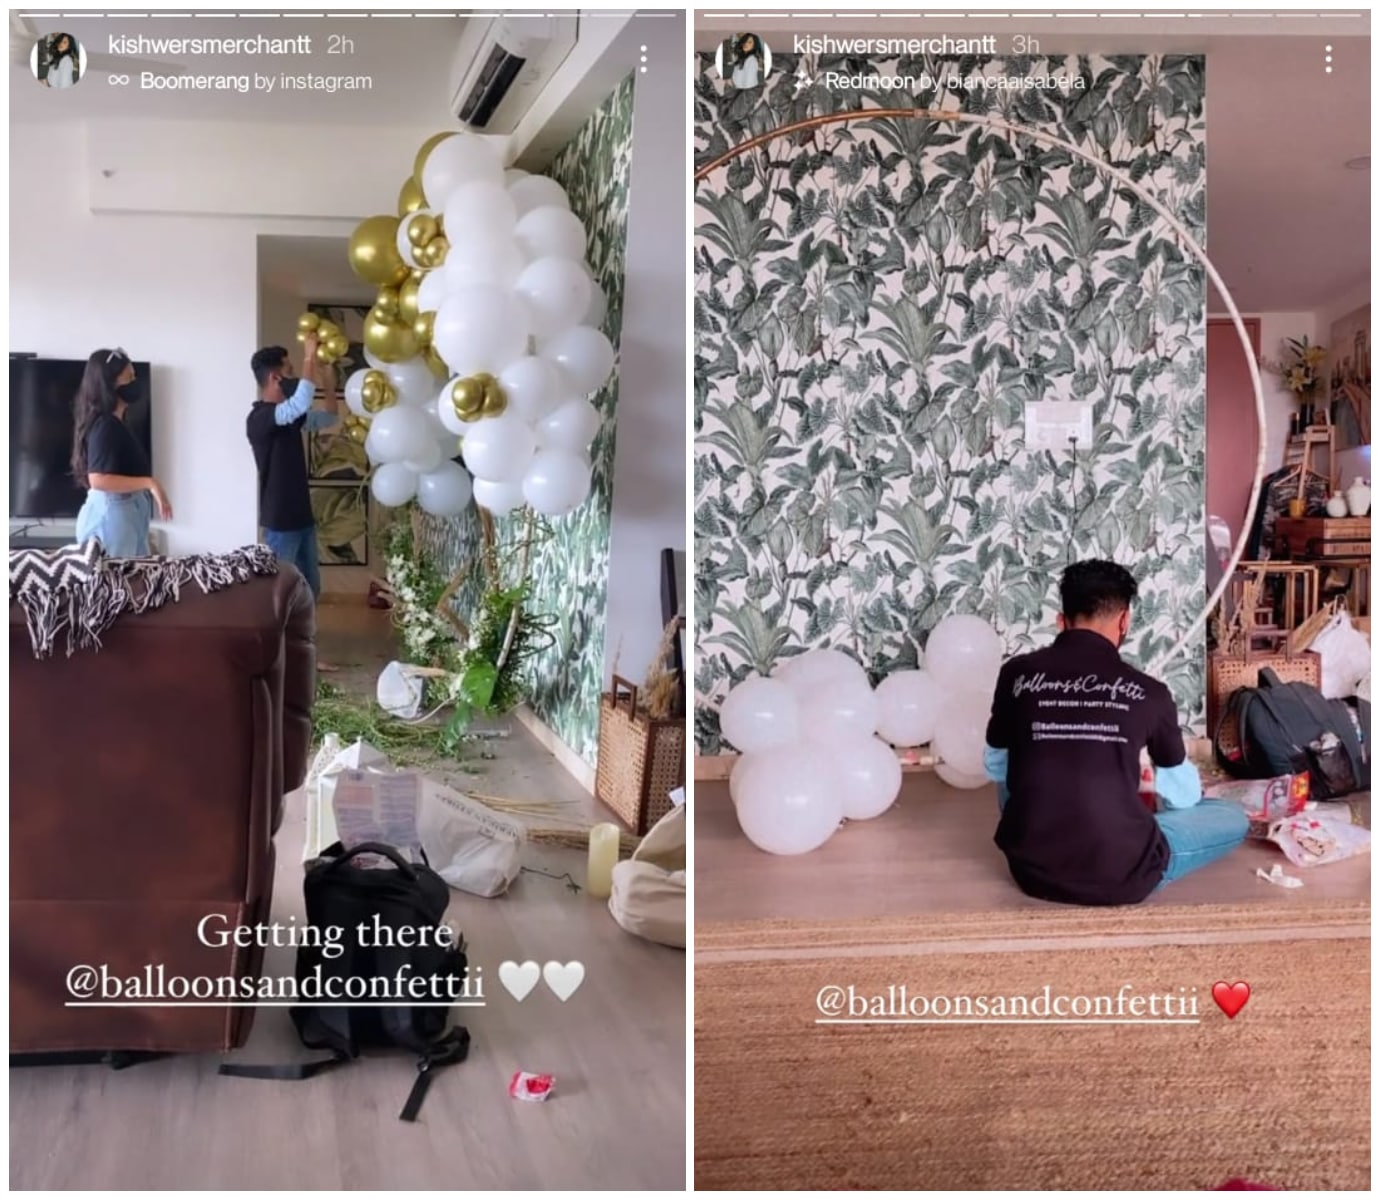 Kishwer Merchant also showed fans how the decorations were being set up.